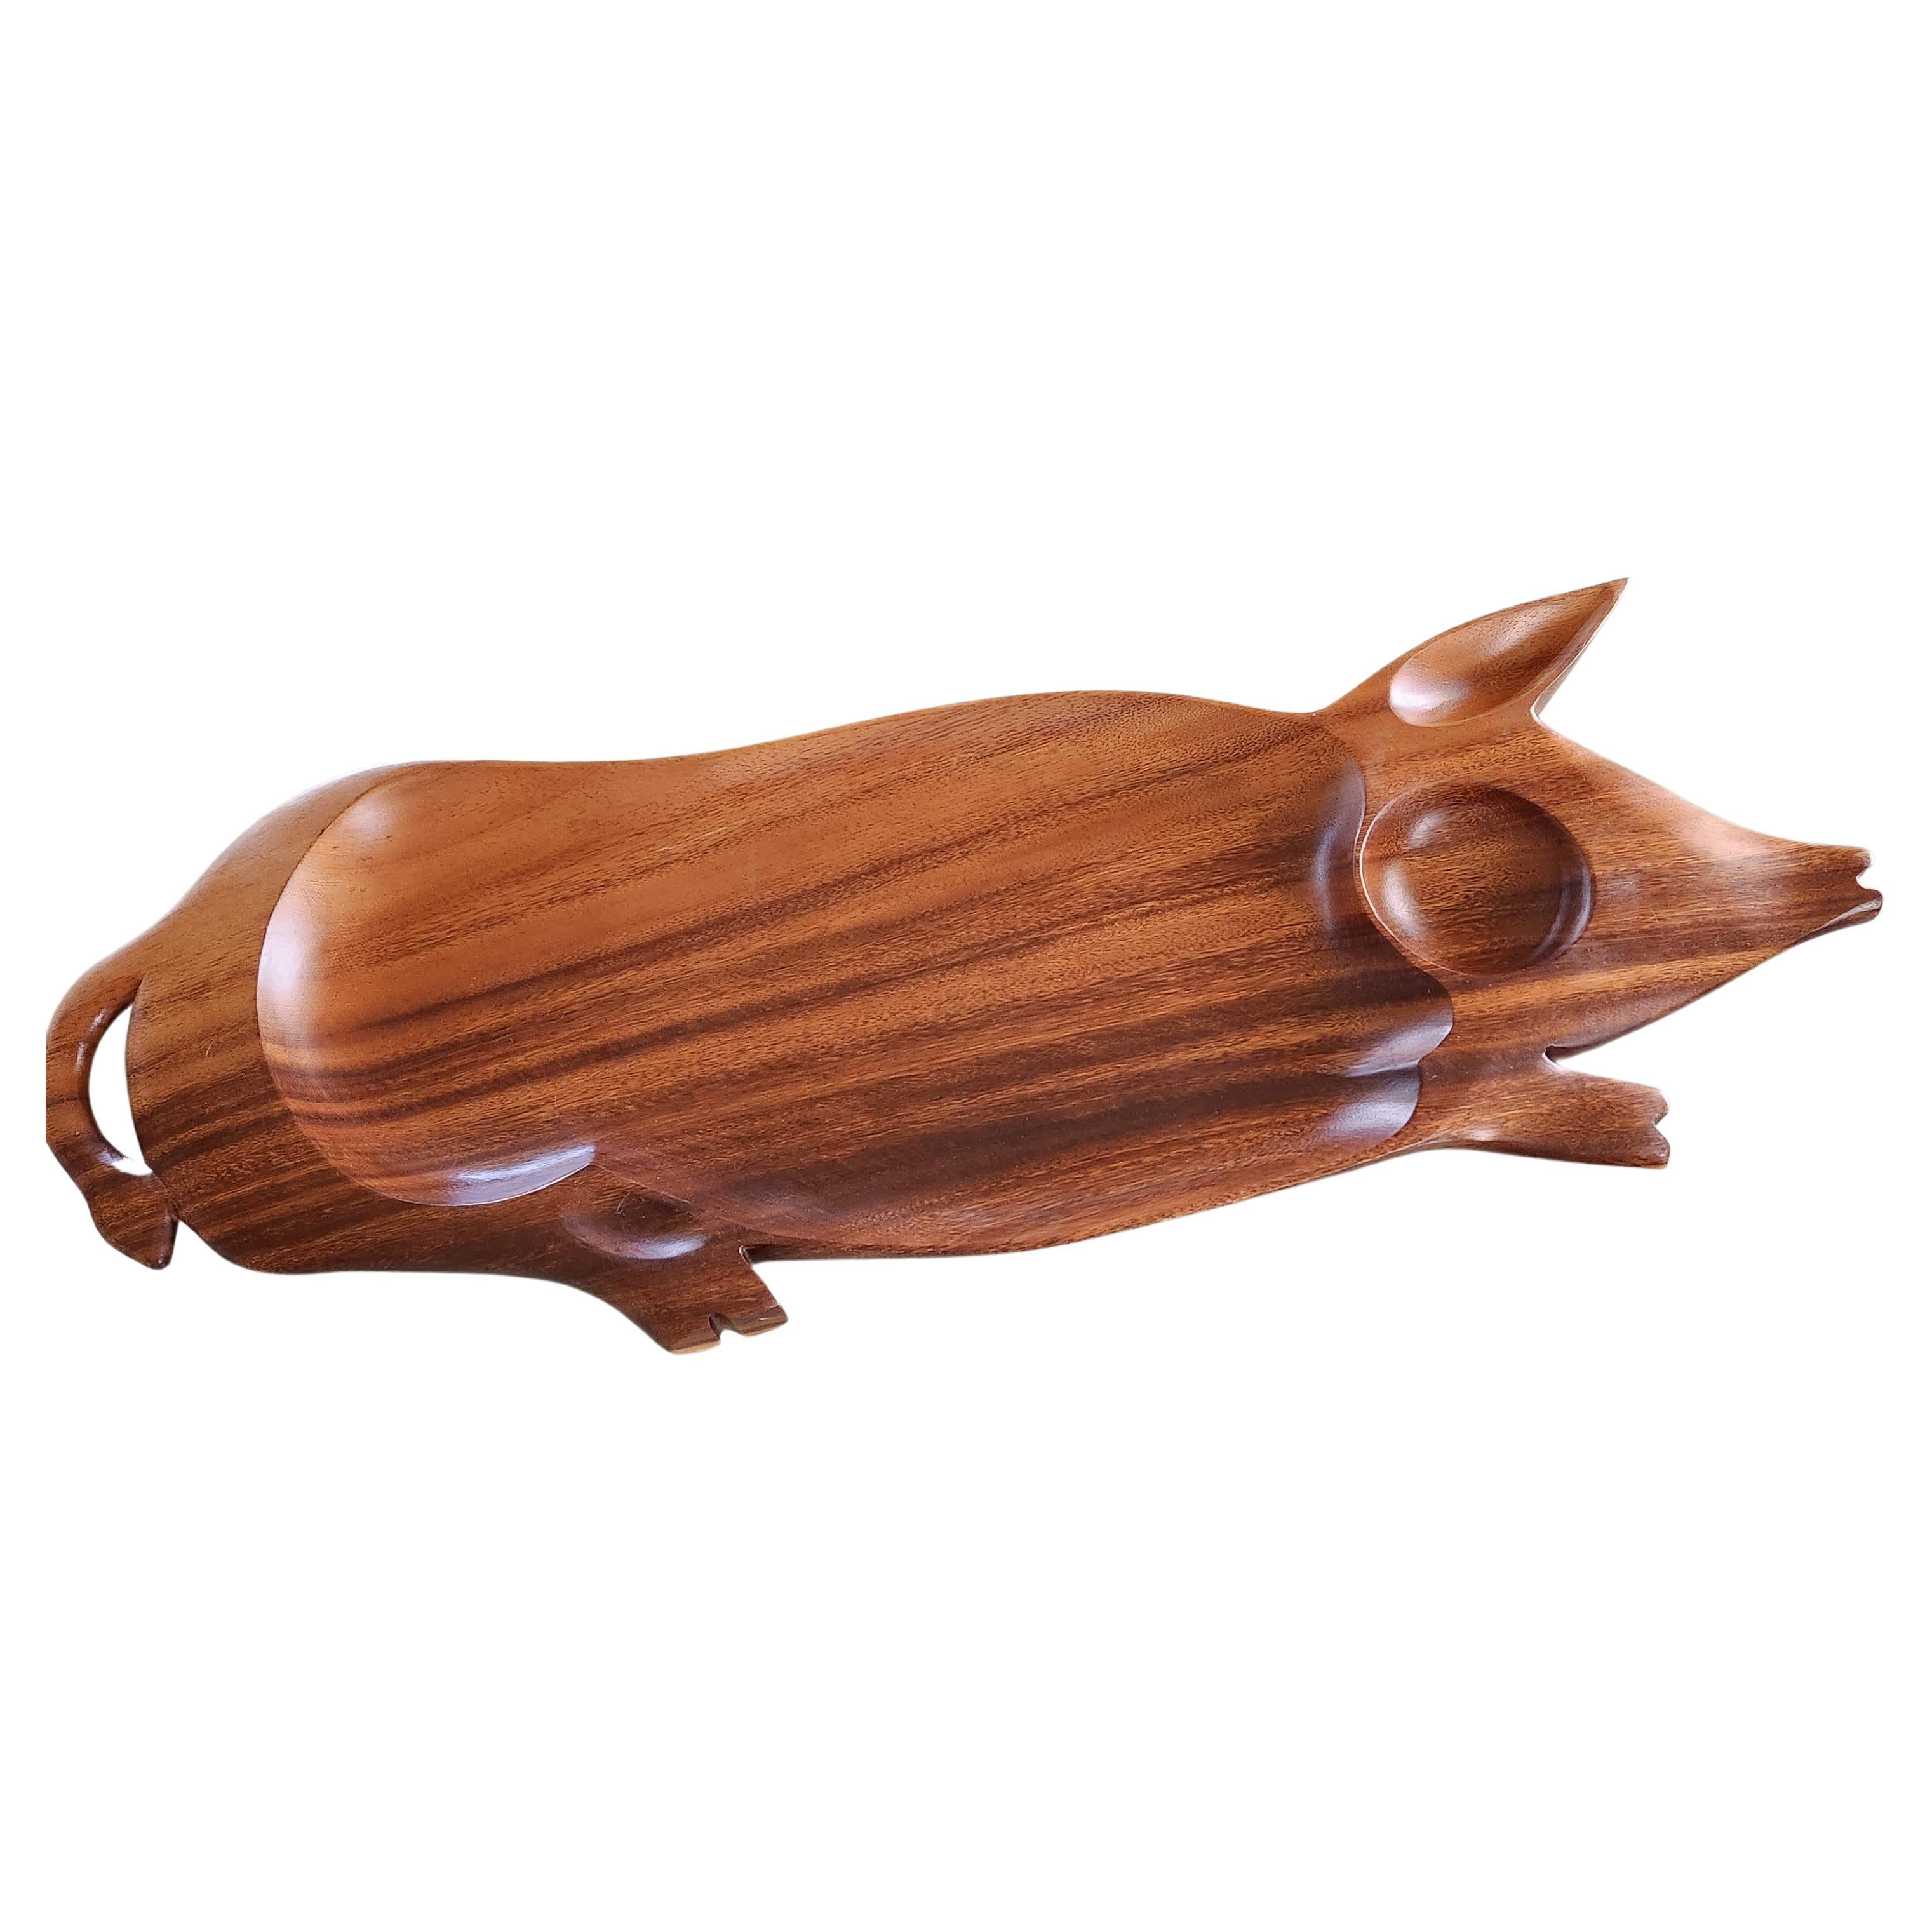 1970s Modern pig Pupu party platter serving tray charcuterie board.
Lovely wood shaped pig.
Approximately 31 wide x 10 deep x 1.5 tall
Whimsical vintage modern piece ideal for the holidays and parties to come.
Preowned original unrestored